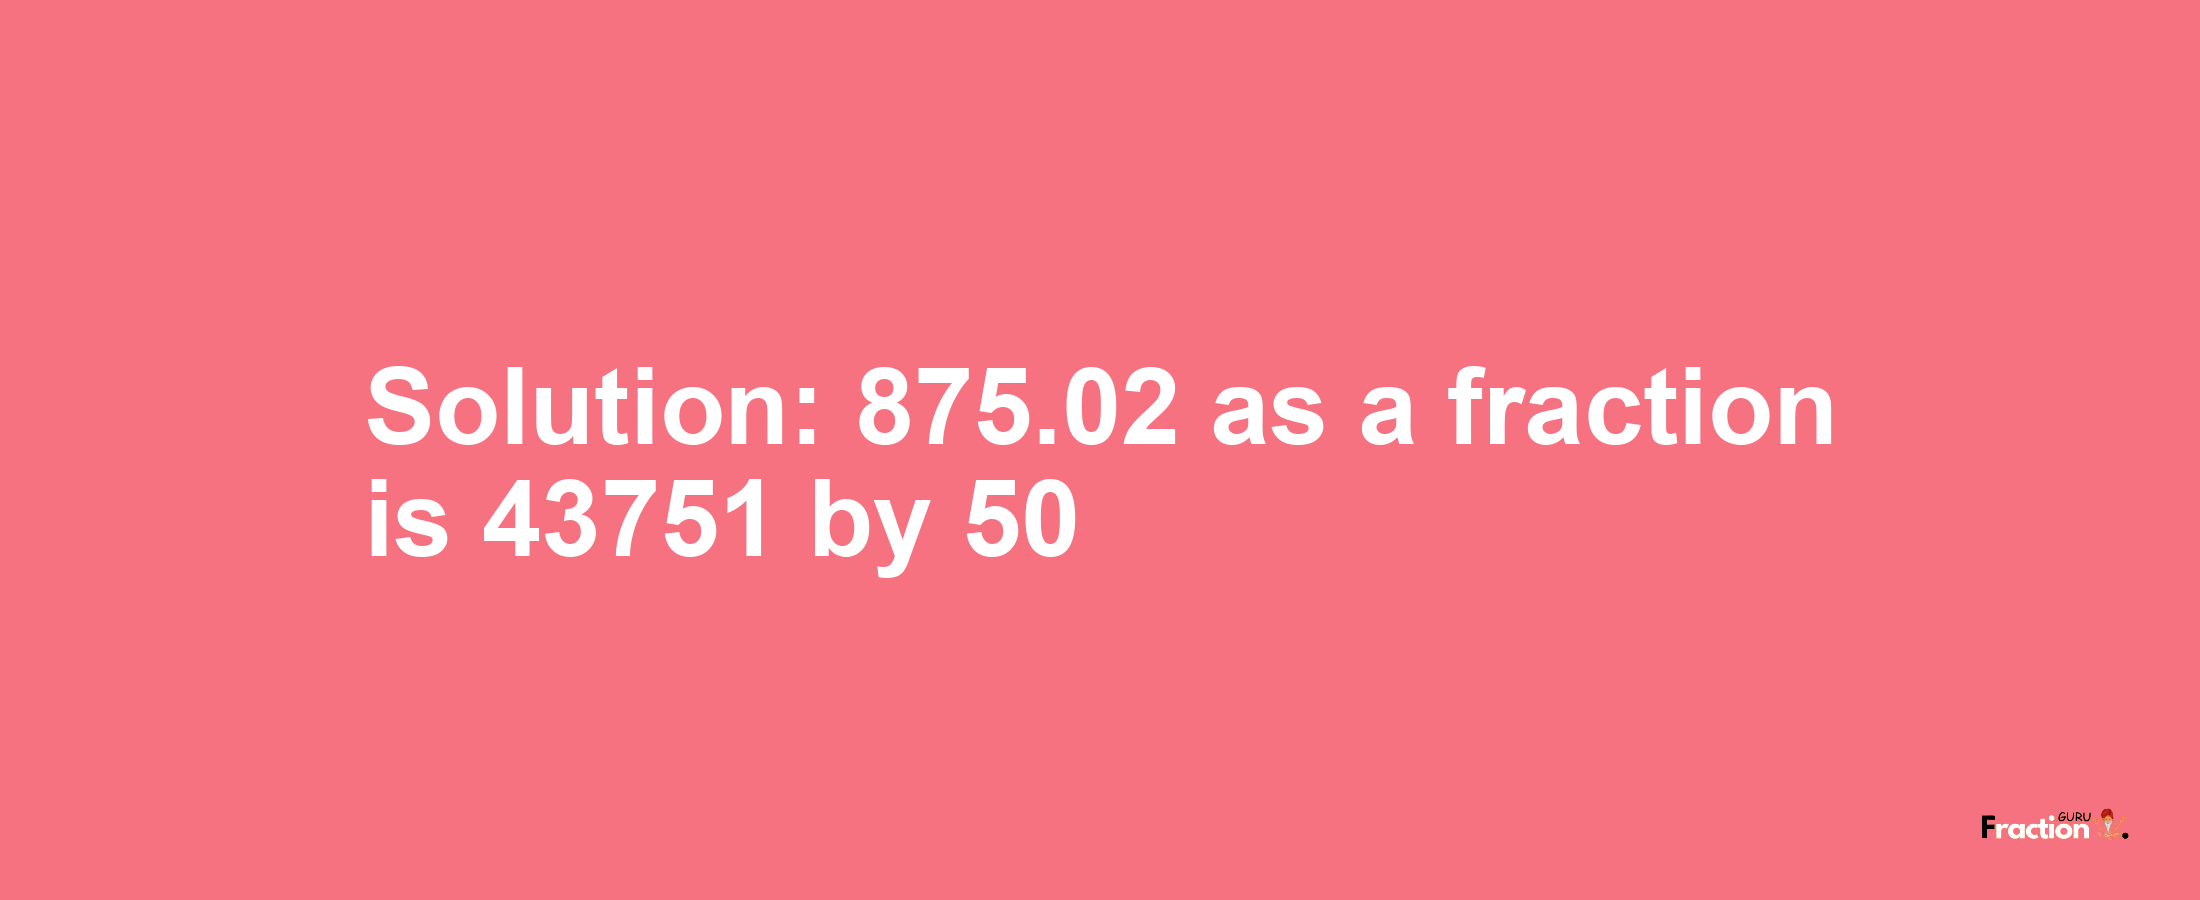 Solution:875.02 as a fraction is 43751/50